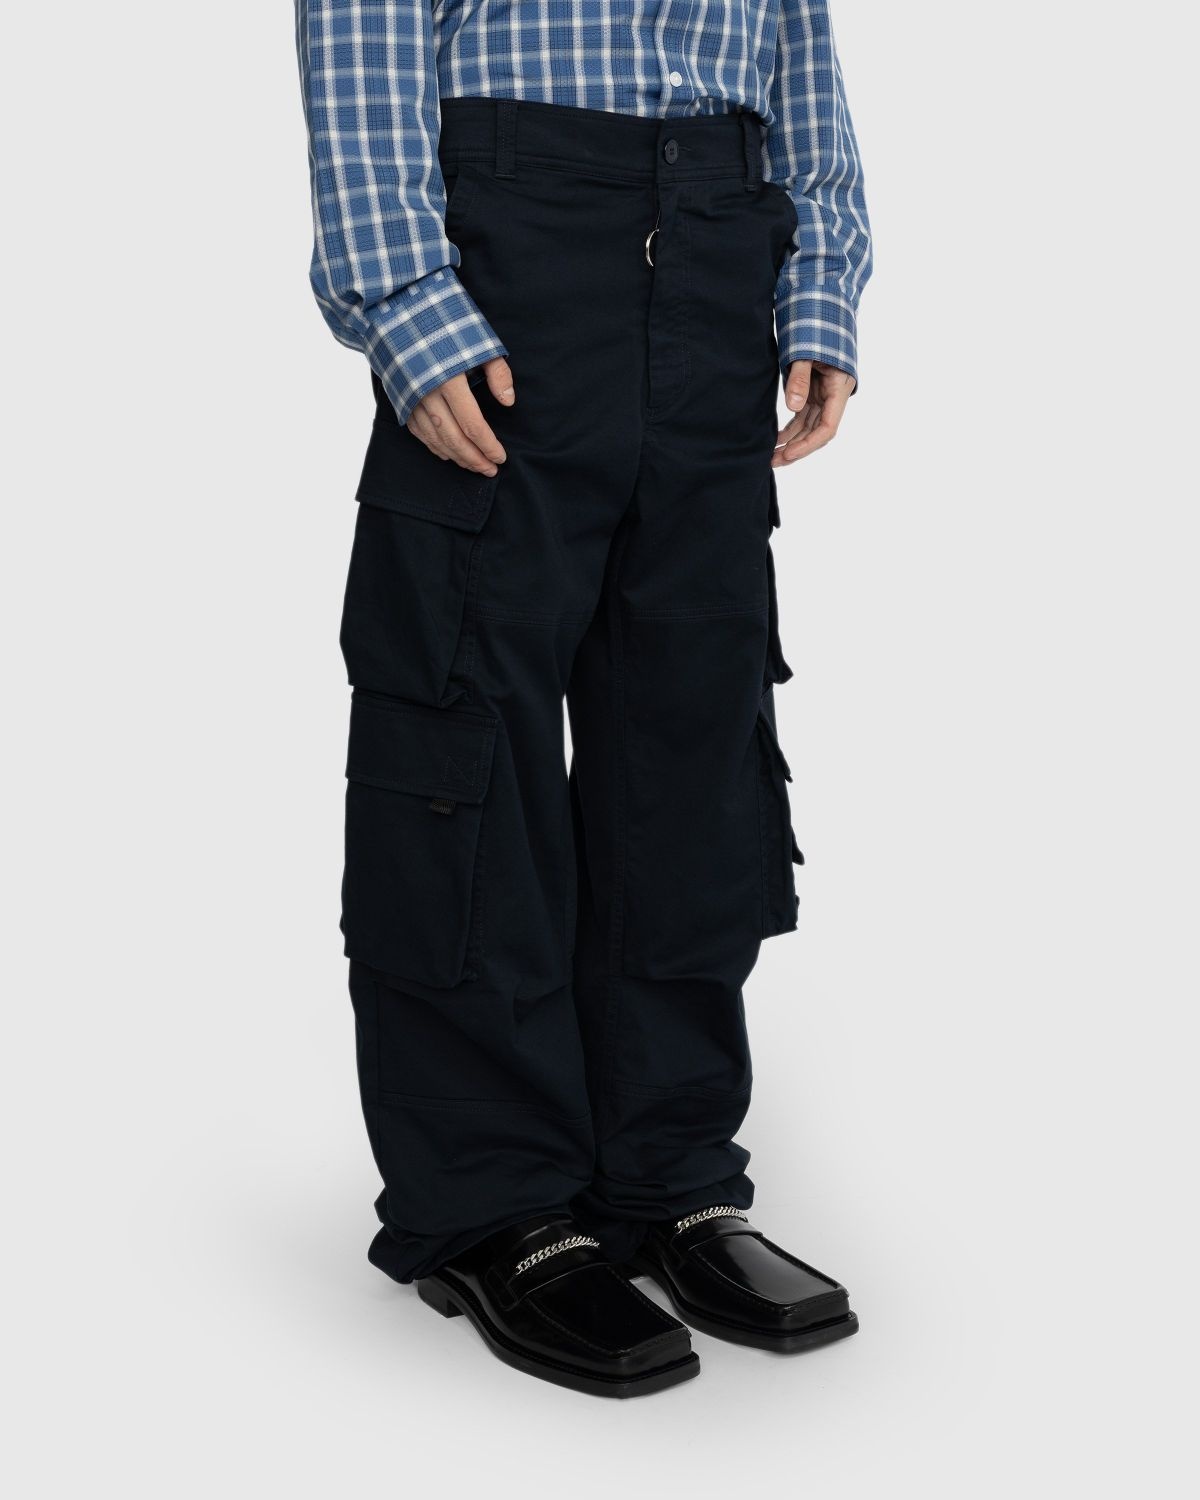 Martine Rose – Pulled Cargo Trouser Navy - 4